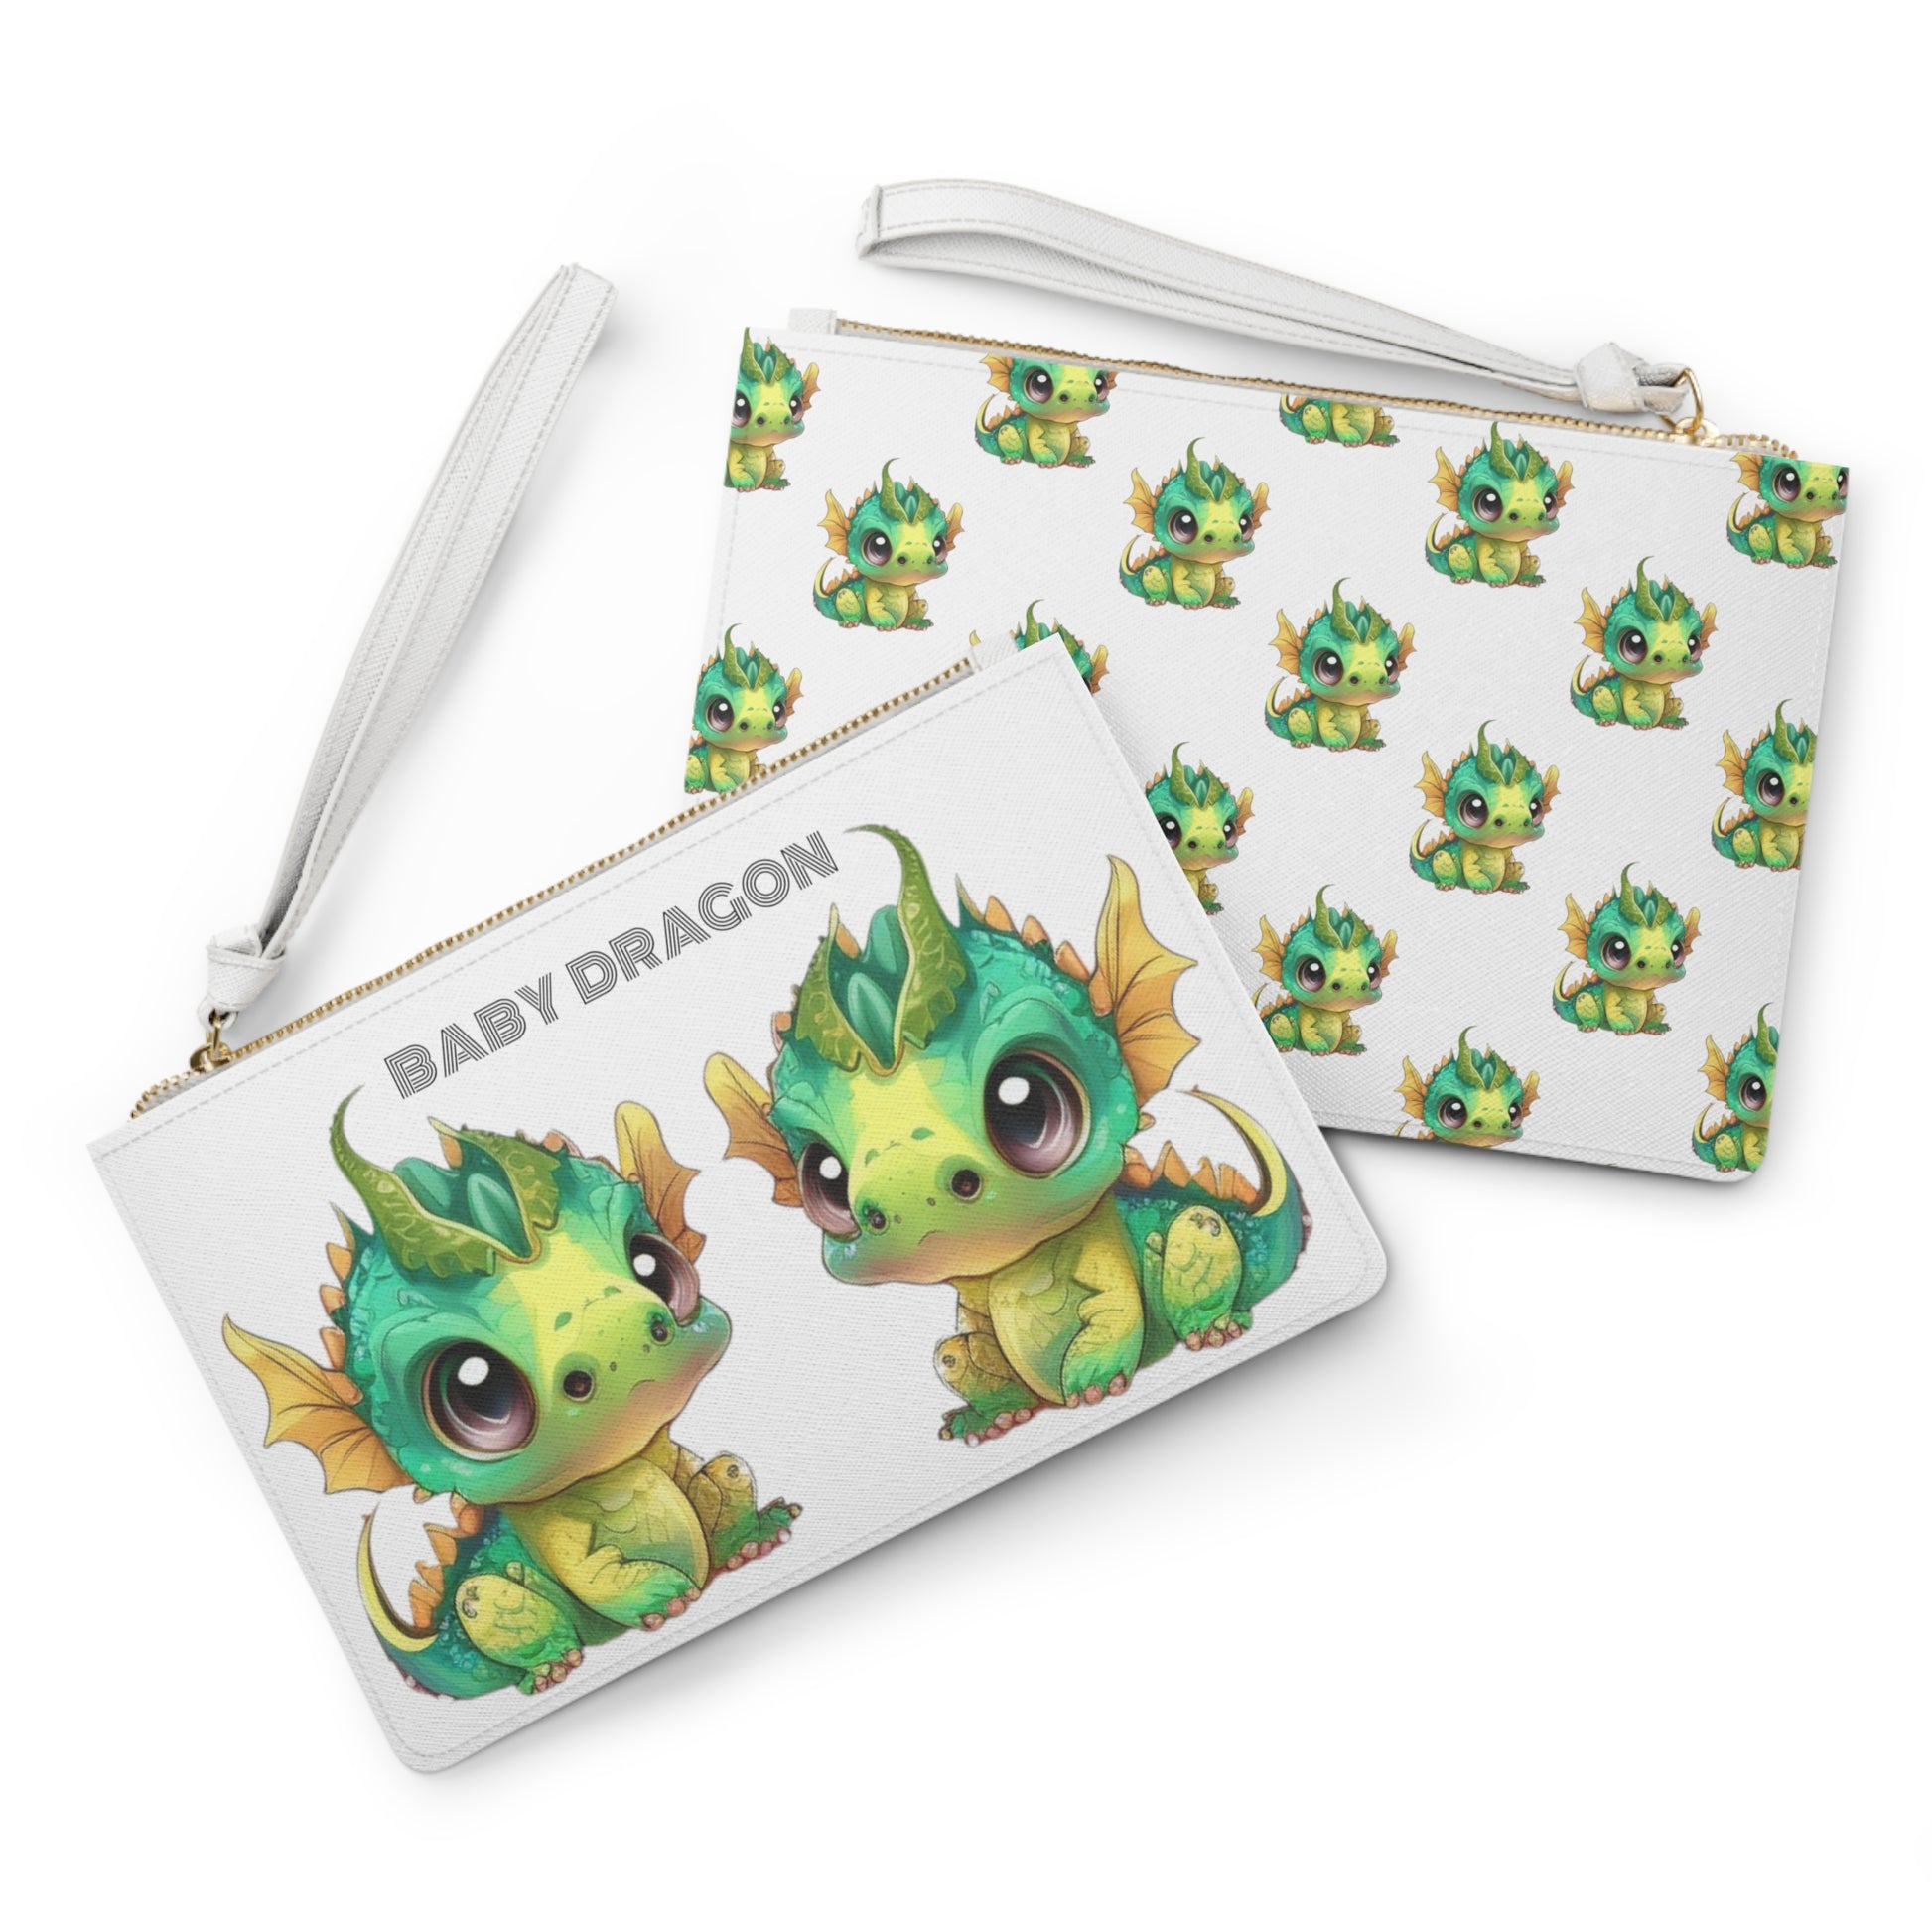 Baby Dragon is the decorative text above 2 darling baby Bobby dragons facing each other - Bobby is in greens and yellows with a little green horn popping out of his cute head - on a white vegan leather sofino patterned clutch bag with a loop white handle and gold zipper - excellent quality! On the back little baby Bobby dragons are all over it.